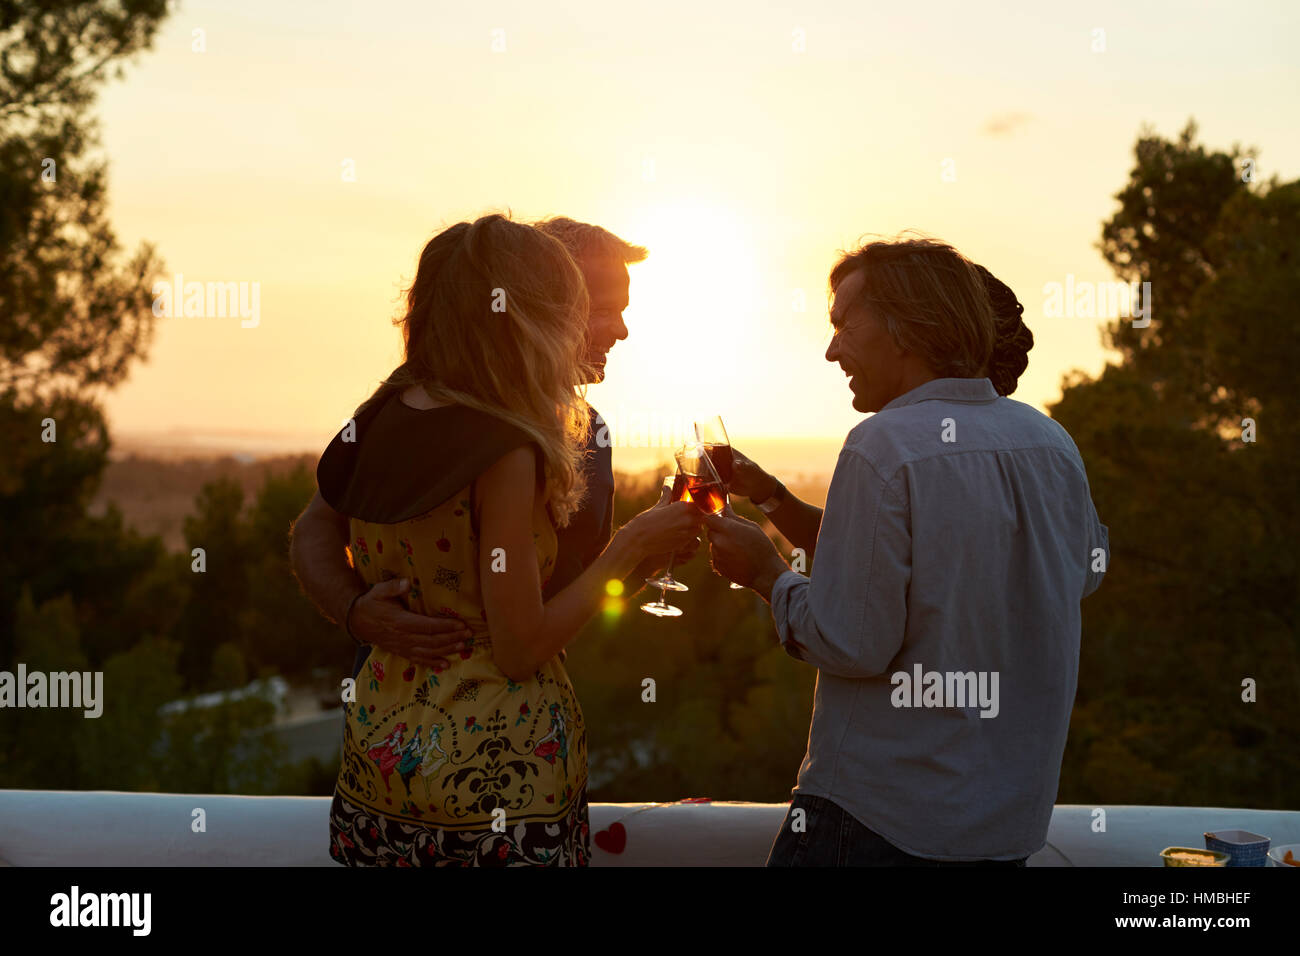 Two couples on a rooftop making a toast at sunset, low light Stock Photo